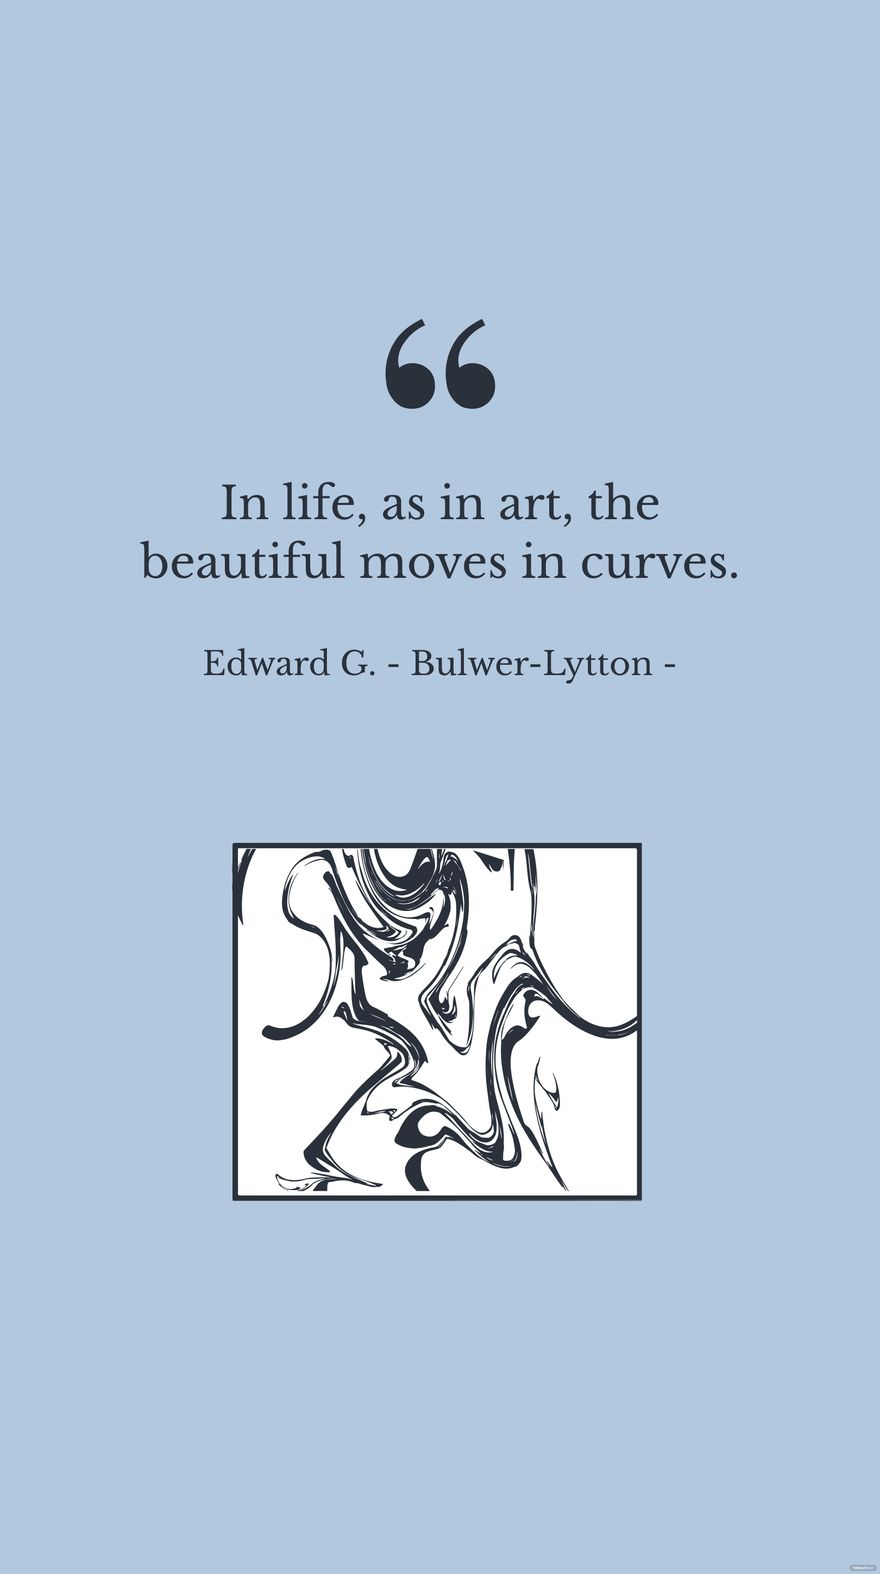 Free Edward G. - Bulwer-Lytton - In life, as in art, the beautiful moves in curves. in JPG